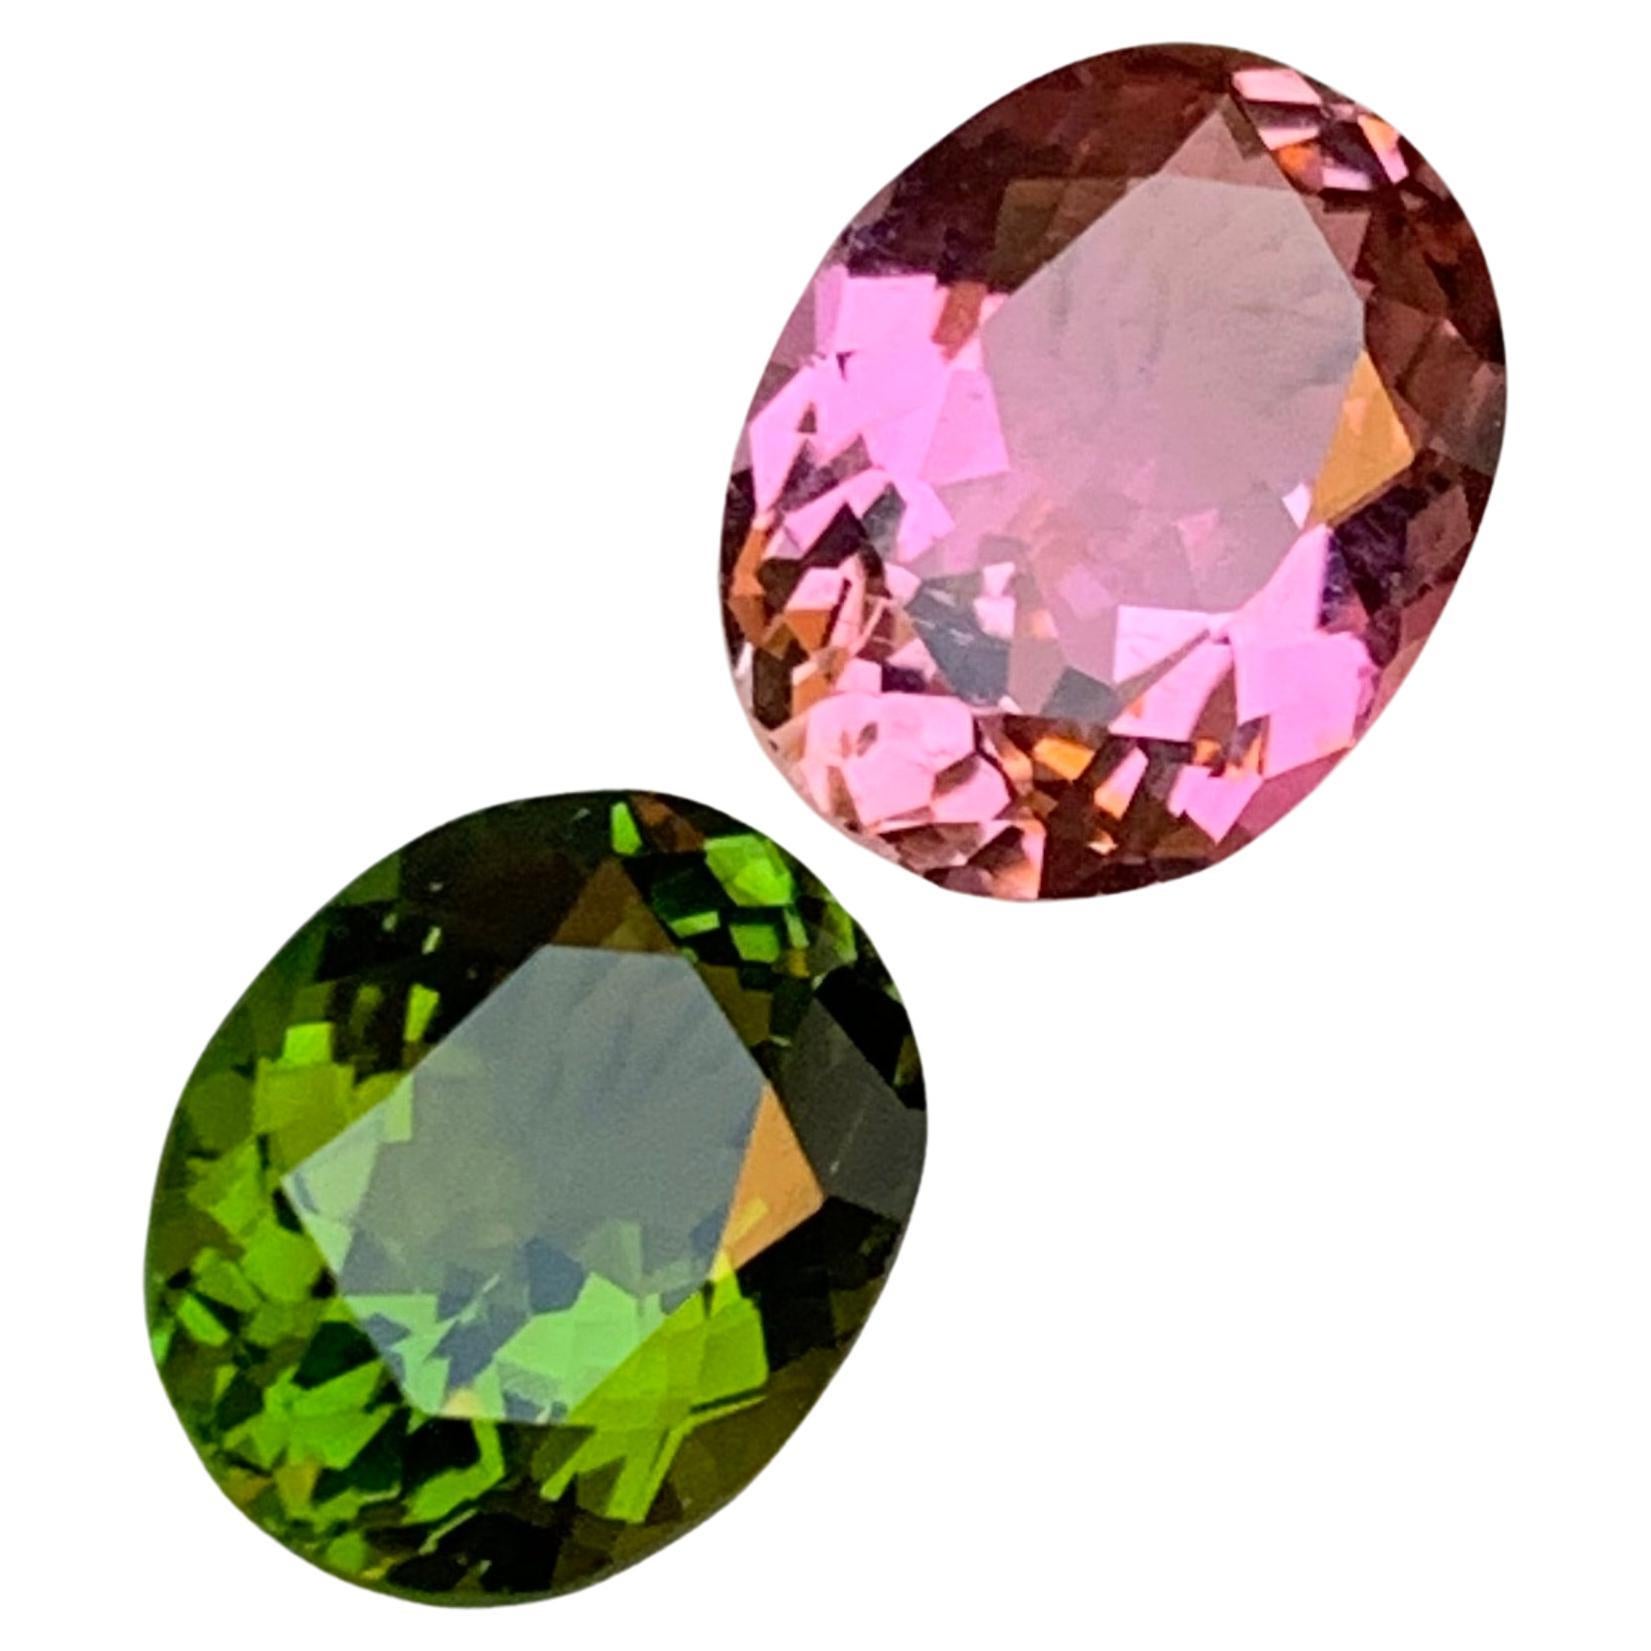 Rare Pink & Green Natural Tourmaline Gemstones 5.25 Ct Oval Cushion for Jewelry 